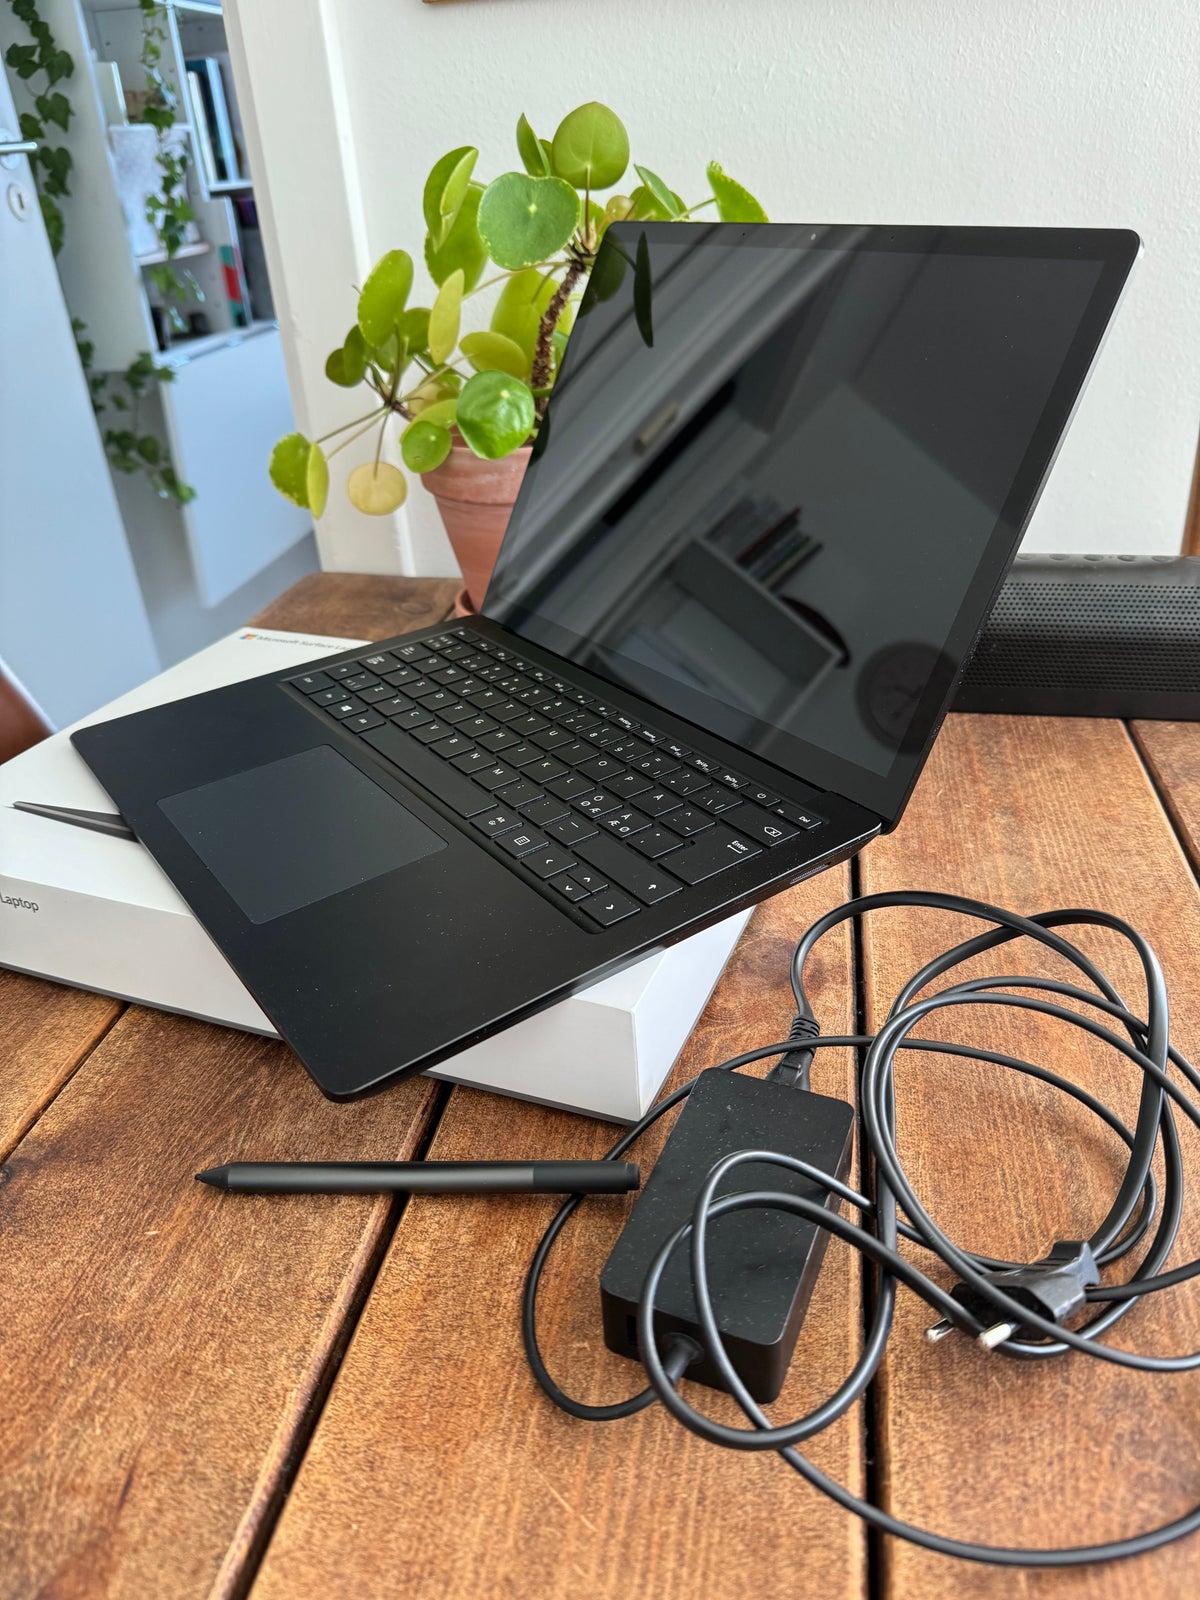 Surface Laptop 3 i5 256 GB inkl. Surface pen